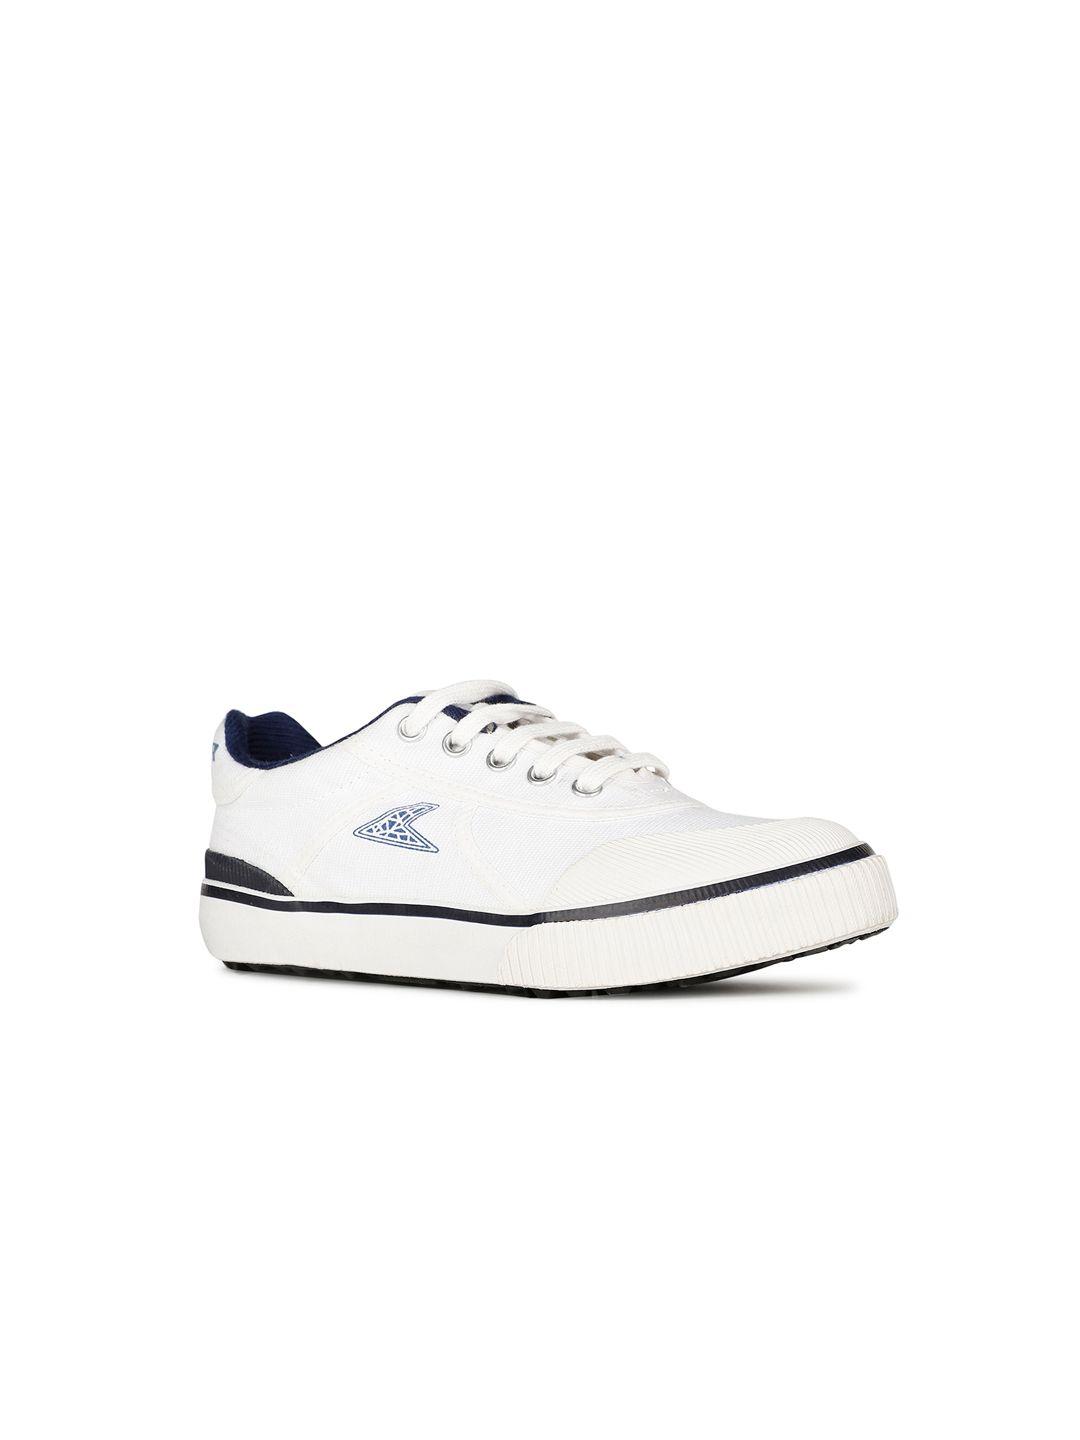 bata boys textured lace-up sneakers